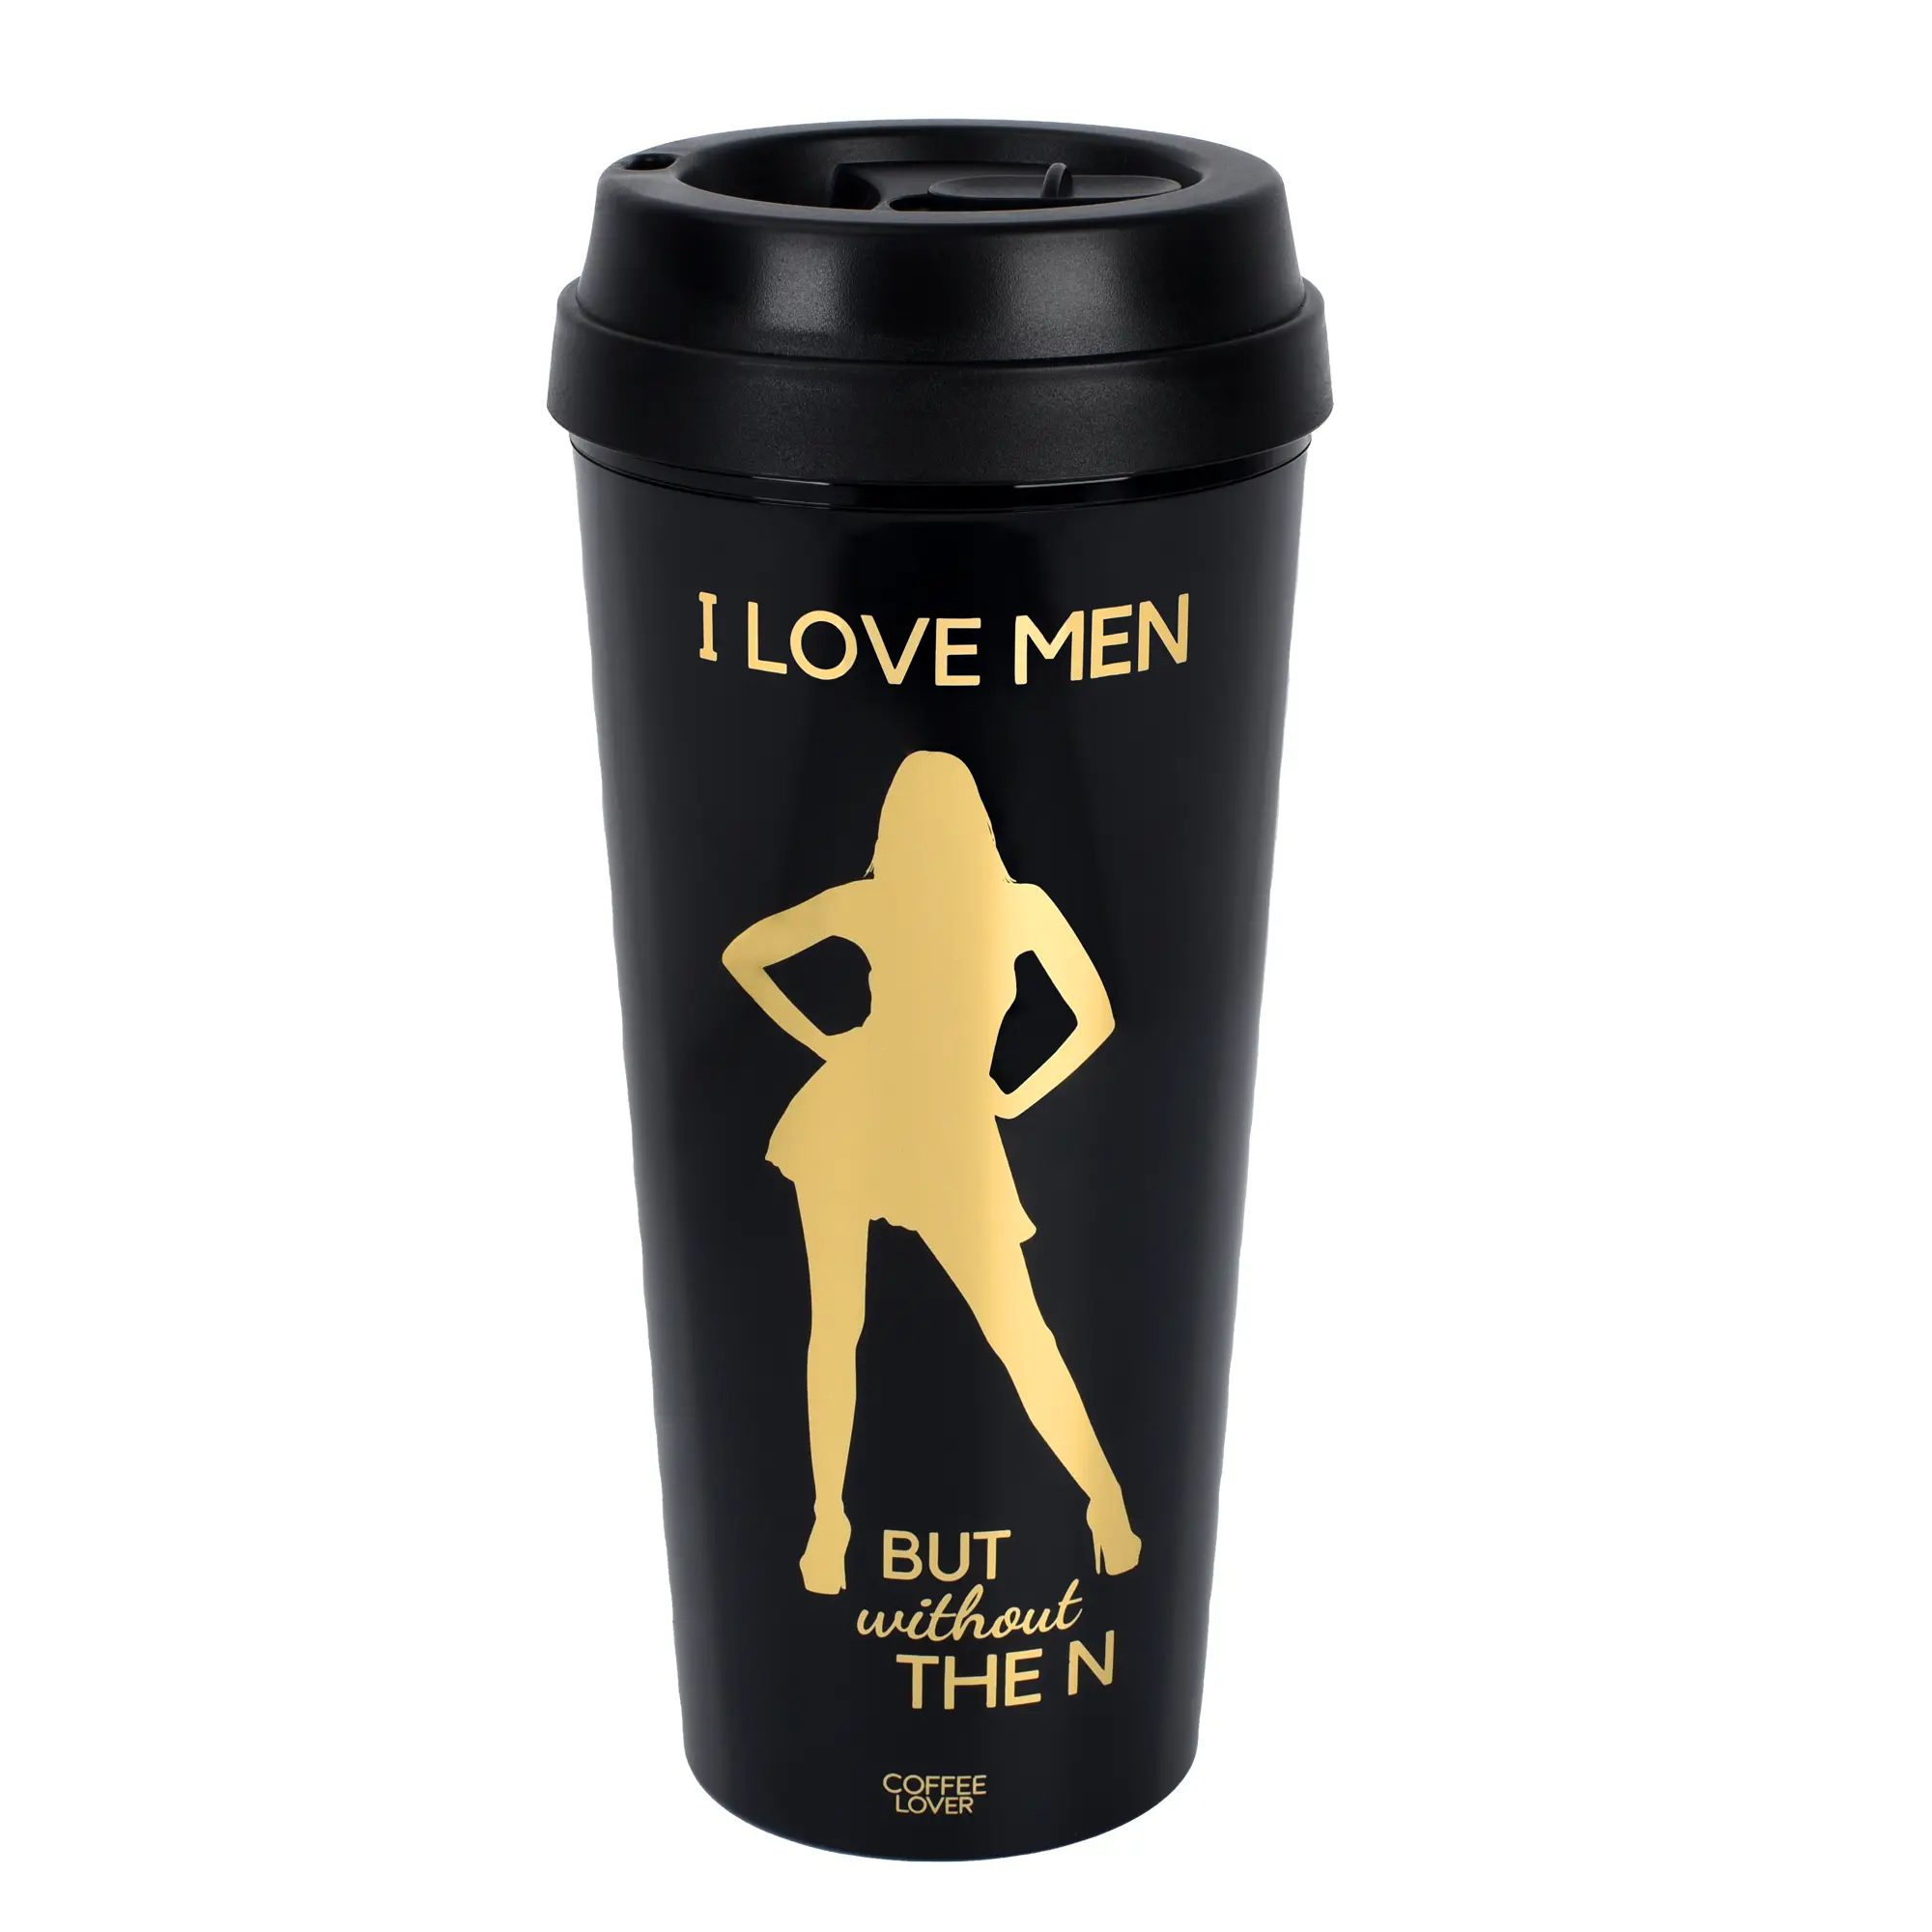 Kaffeebecher Love Men the without N but